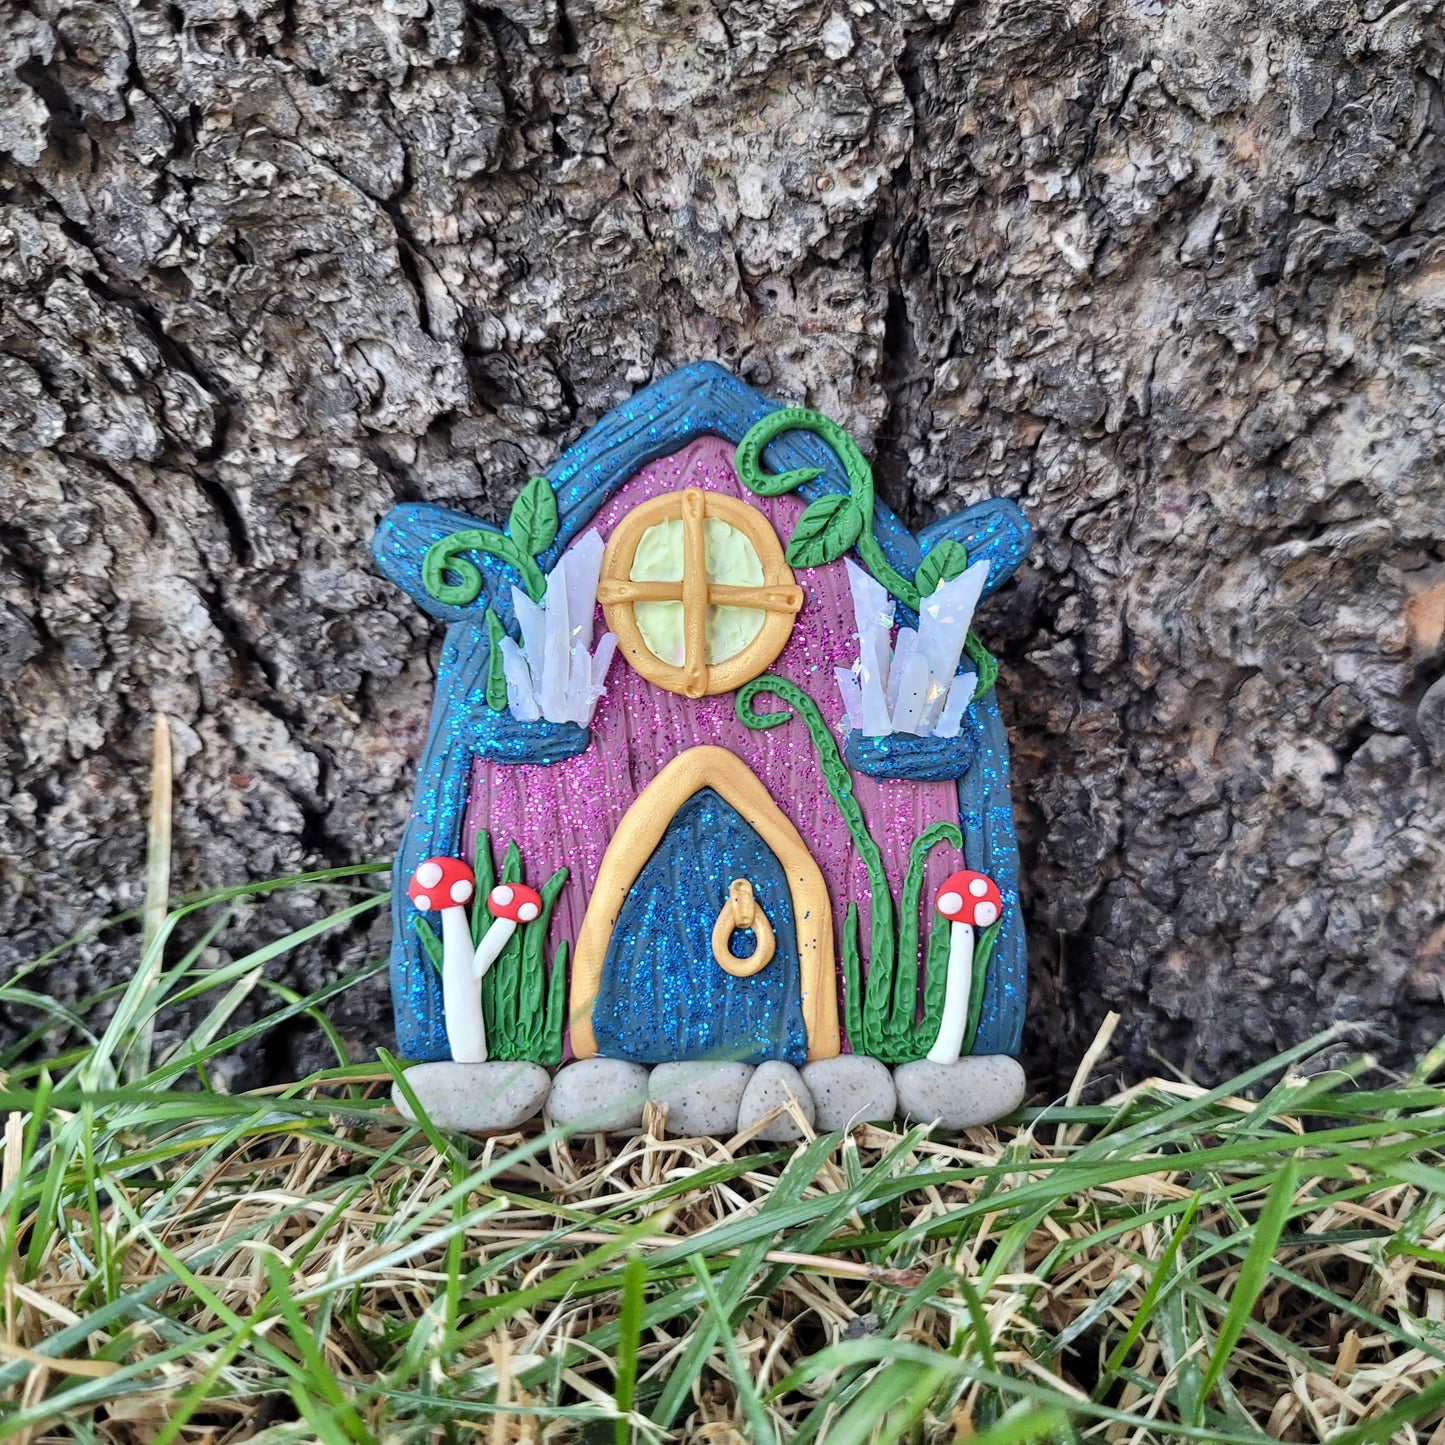 The fairy door rests against the bark of a tree surrounded by green grass. The dark purple door is covered in glitter with a dark blue "wood" roof. It is detailed with gold trim, a window and door, a crystal display, mushrooms, vines and grass.